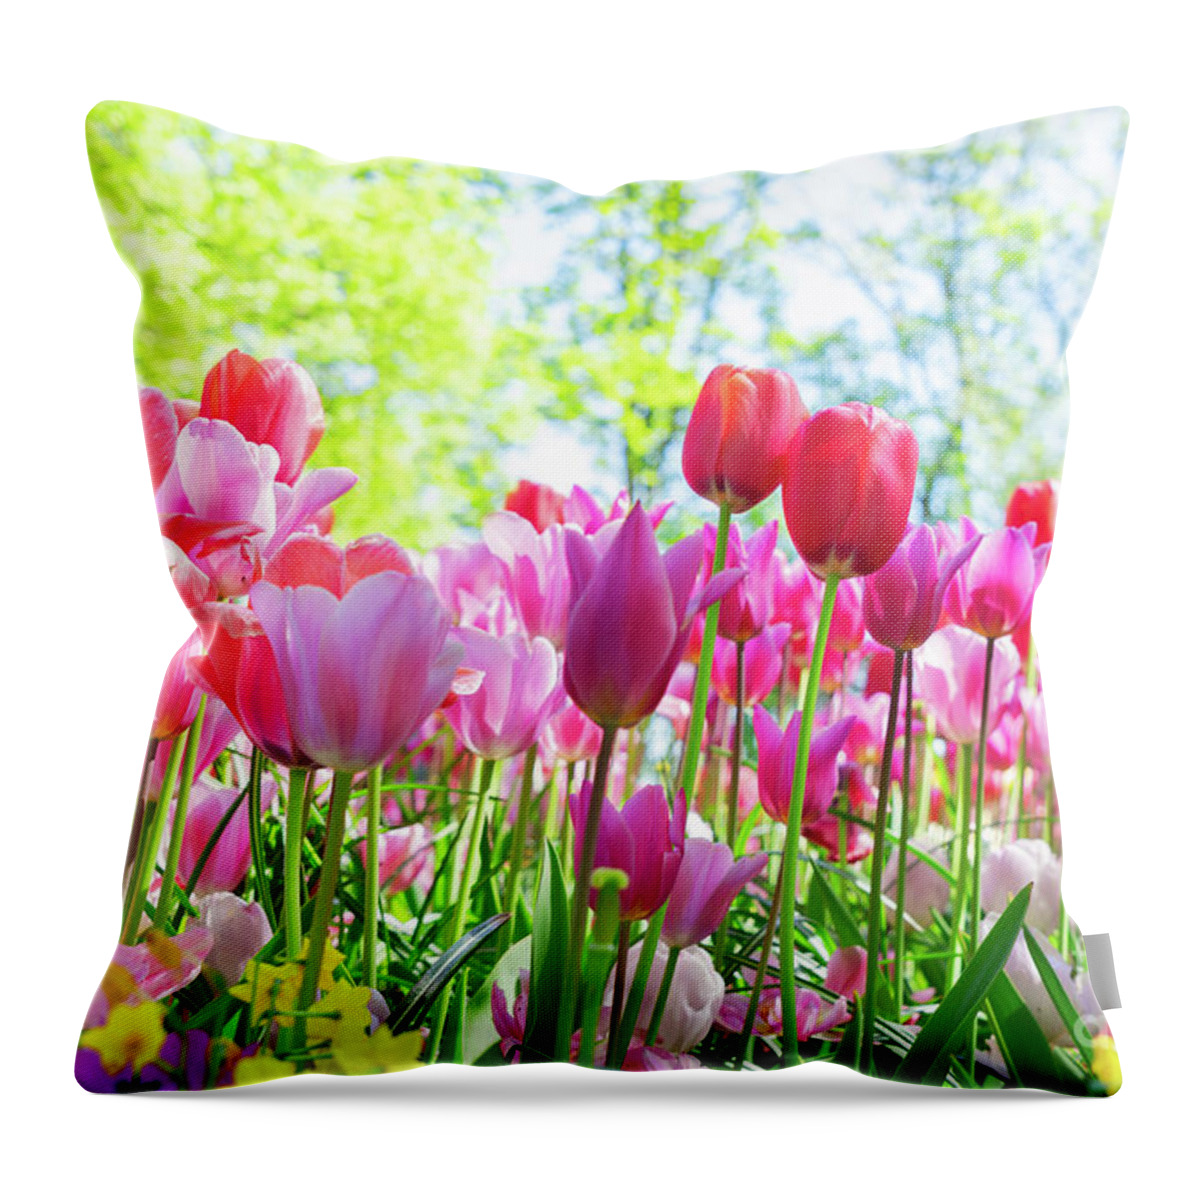 Tulips Throw Pillow featuring the photograph Tulips Pink Growth by Anastasy Yarmolovich